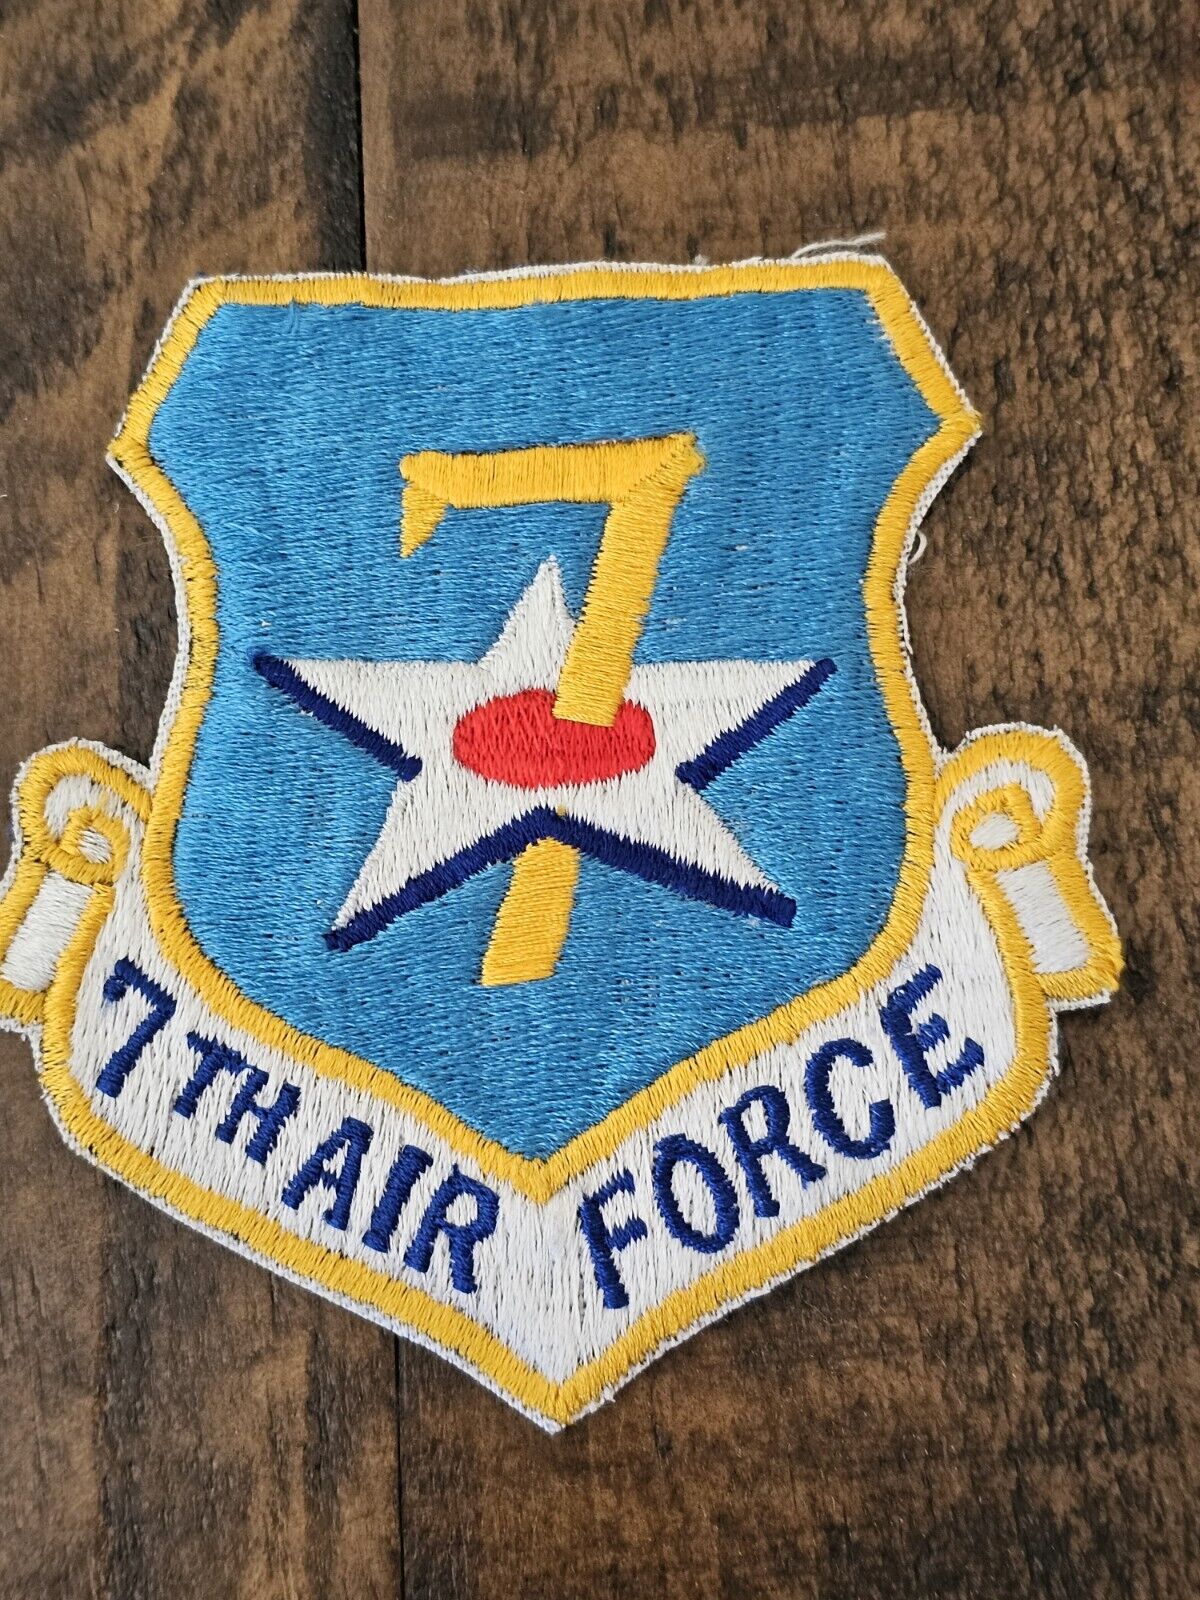 1950s USAF 7th Air Force Japanese Made 5 Inch Squadron Patch L@@K